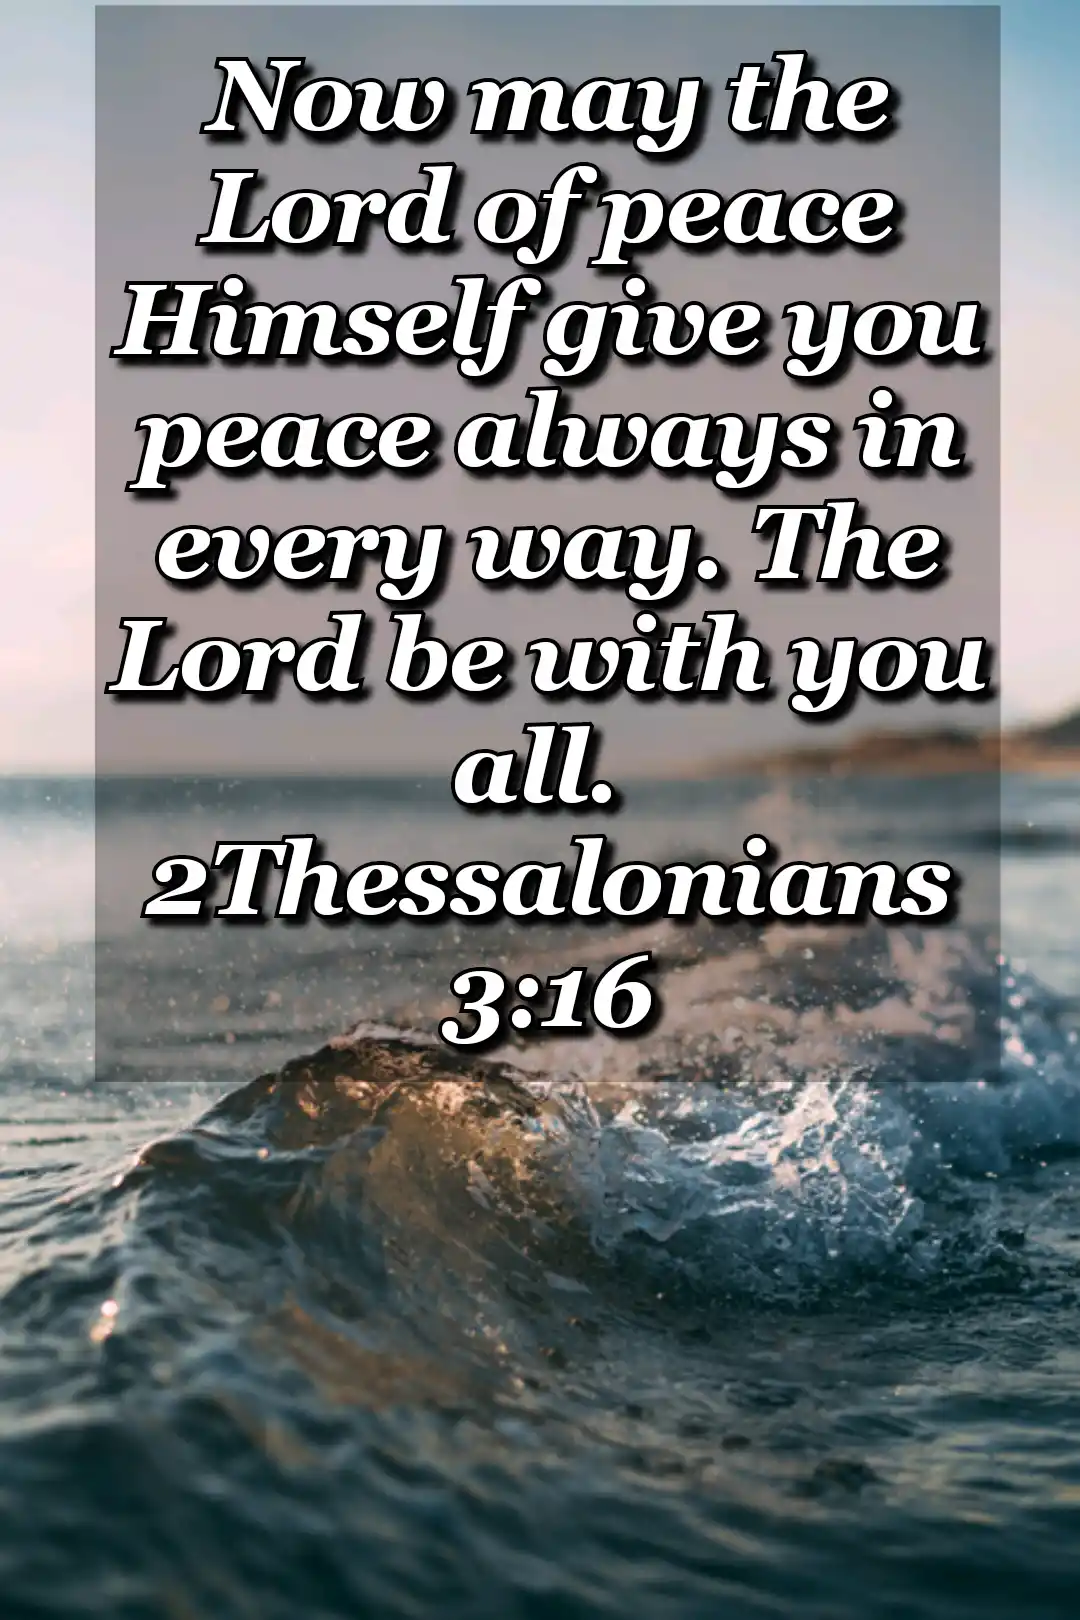 Bible-Verses-about-strength (2 Thessalonians 3:16)